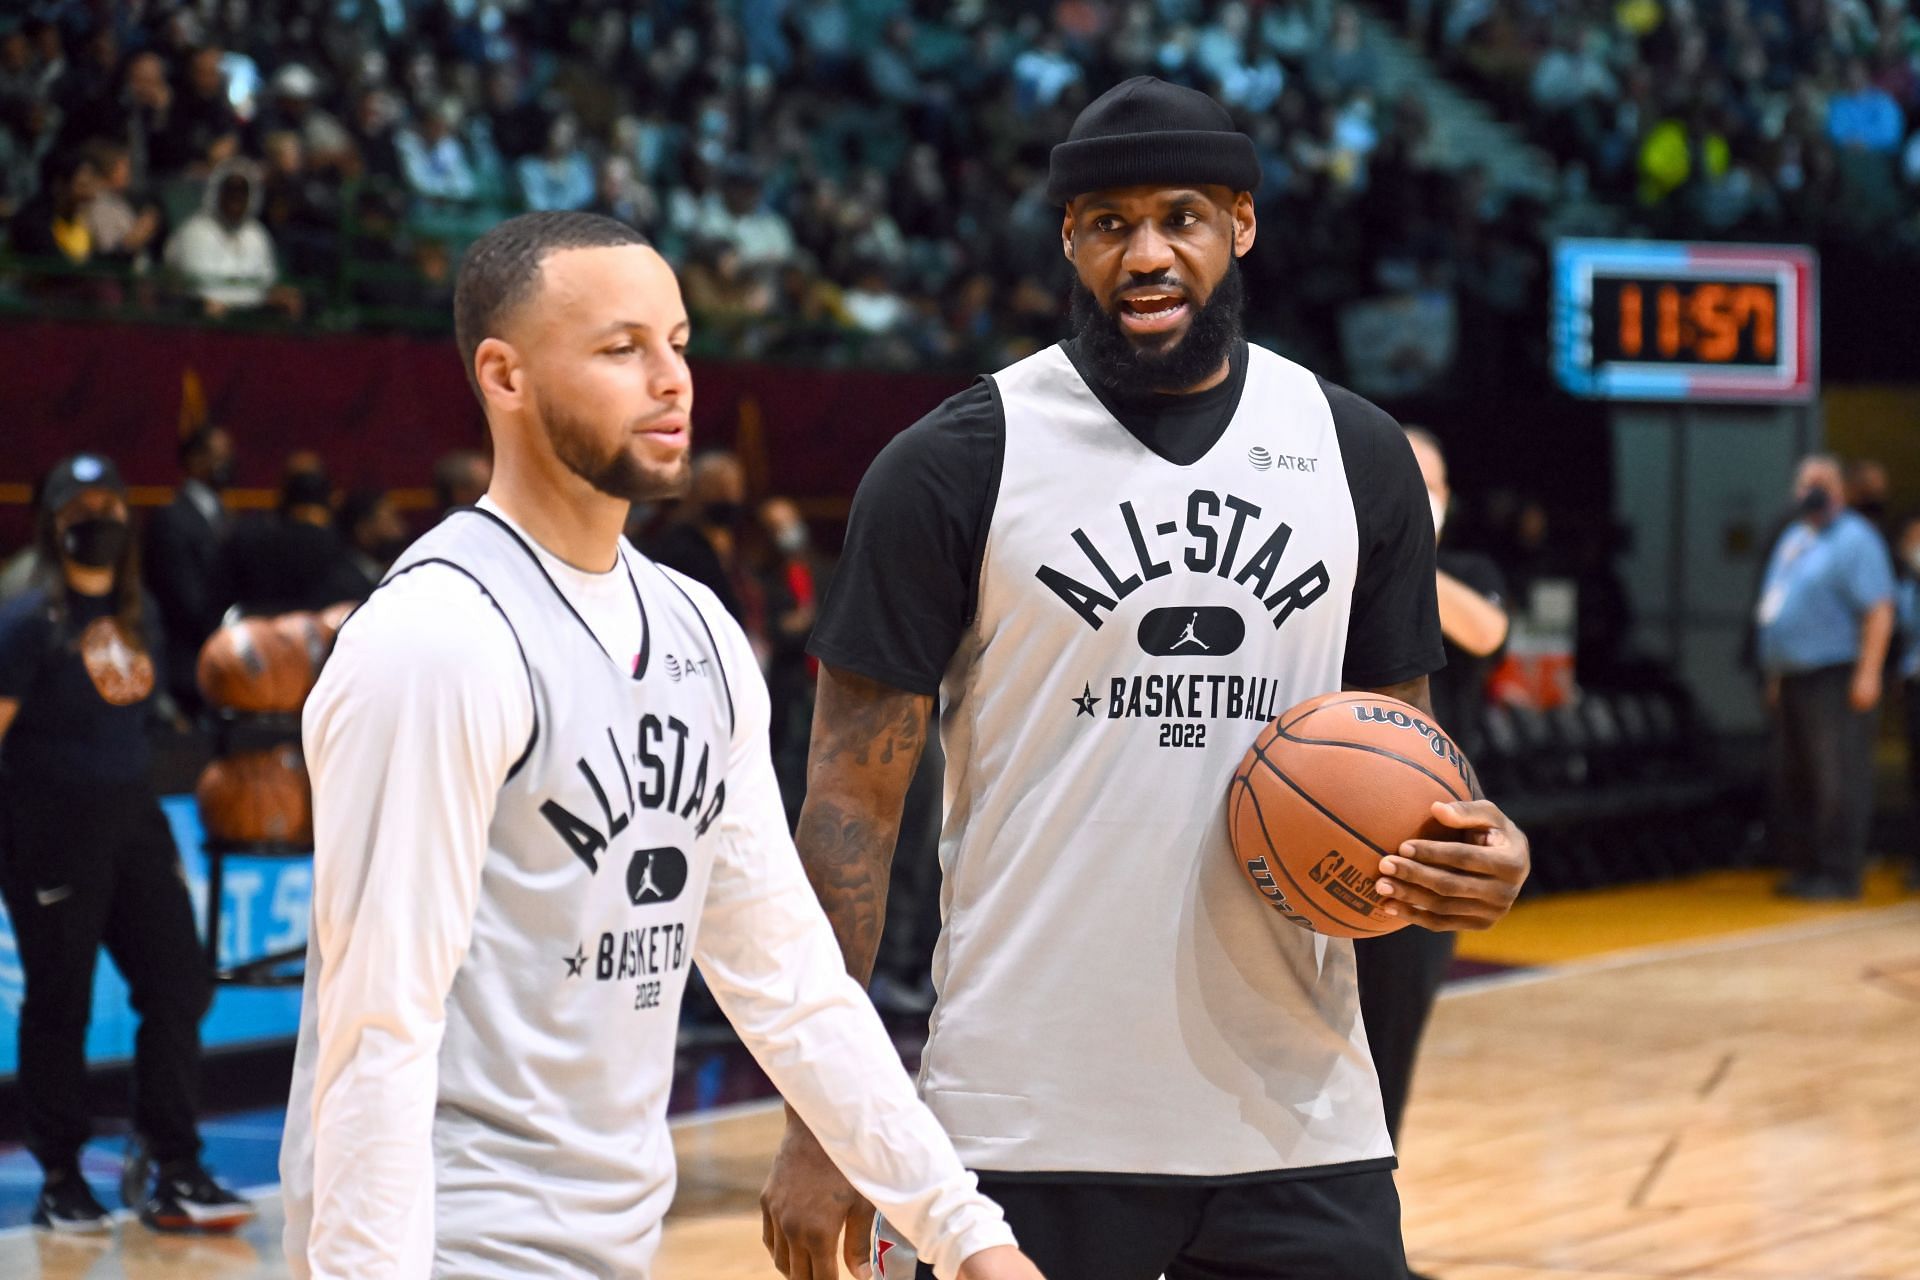 Steph Curry and LeBron James at the 2022 NBA All-Star Game